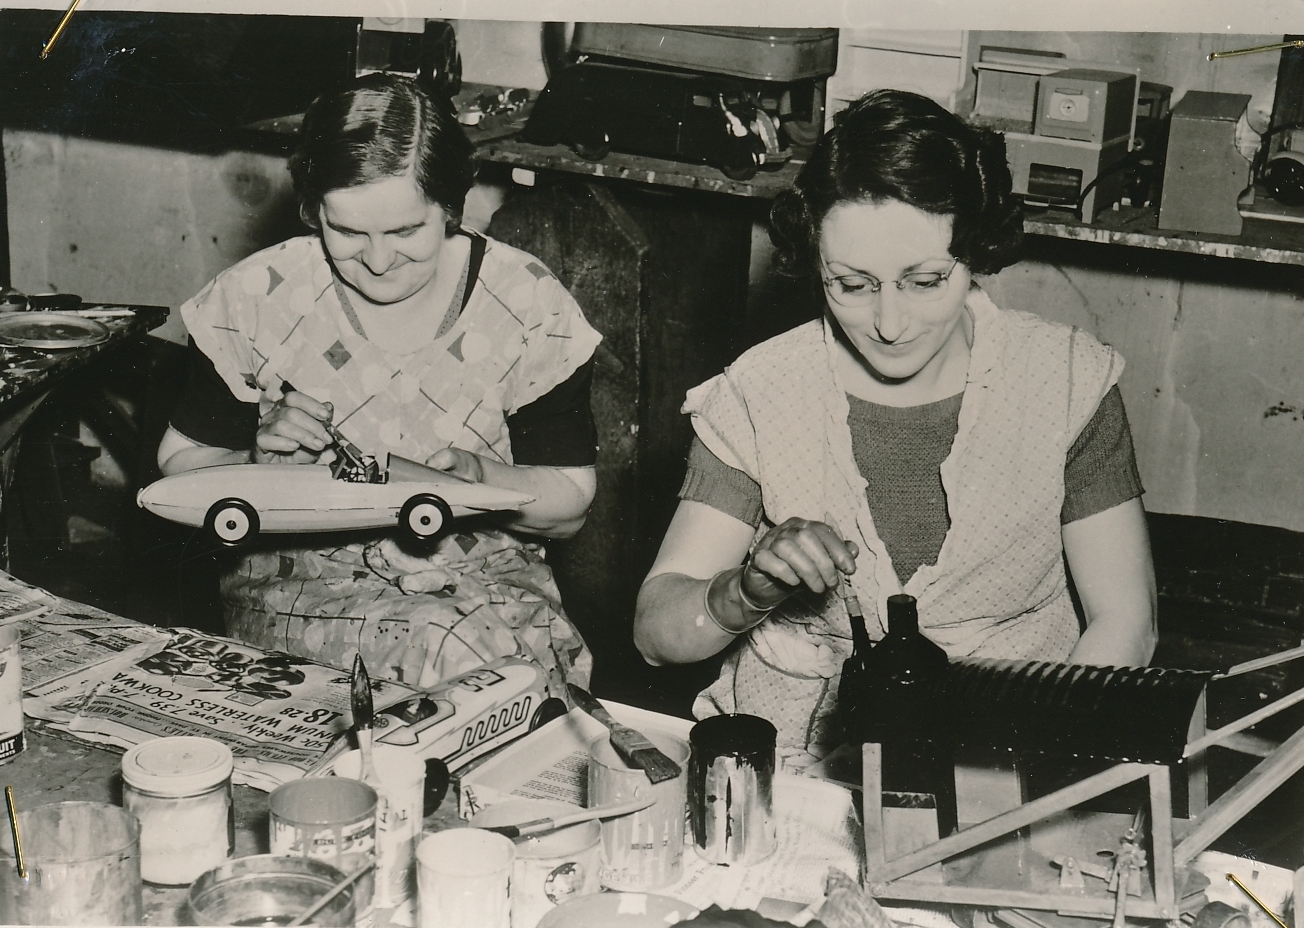 These WPA workers are refurbishing toys, to be distributed during Christmas time to underprivileged children in St. Paul, Minnesota. A job with a higher social purpose is a job worth smiling about. Photo courtesy of the National Archives (ca. 1935-1943).